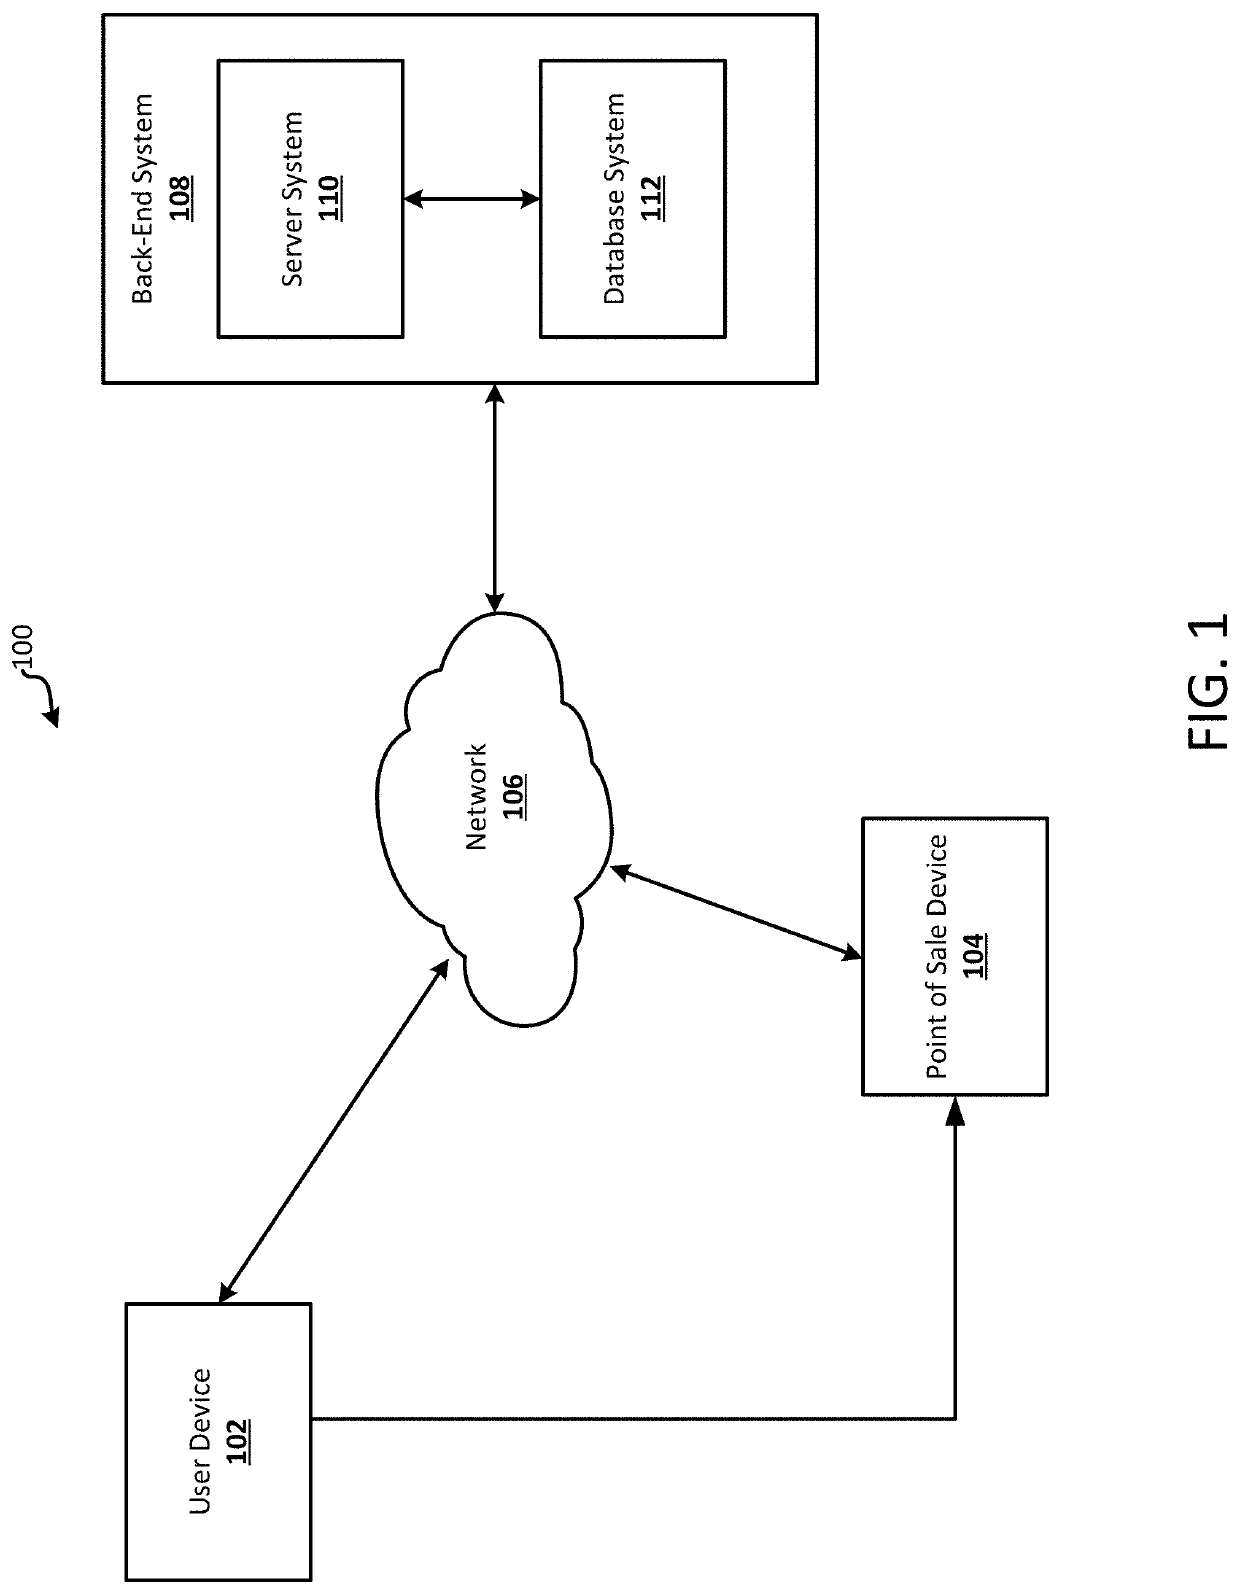 Systems and methods for activating an authentication token within a communication platform